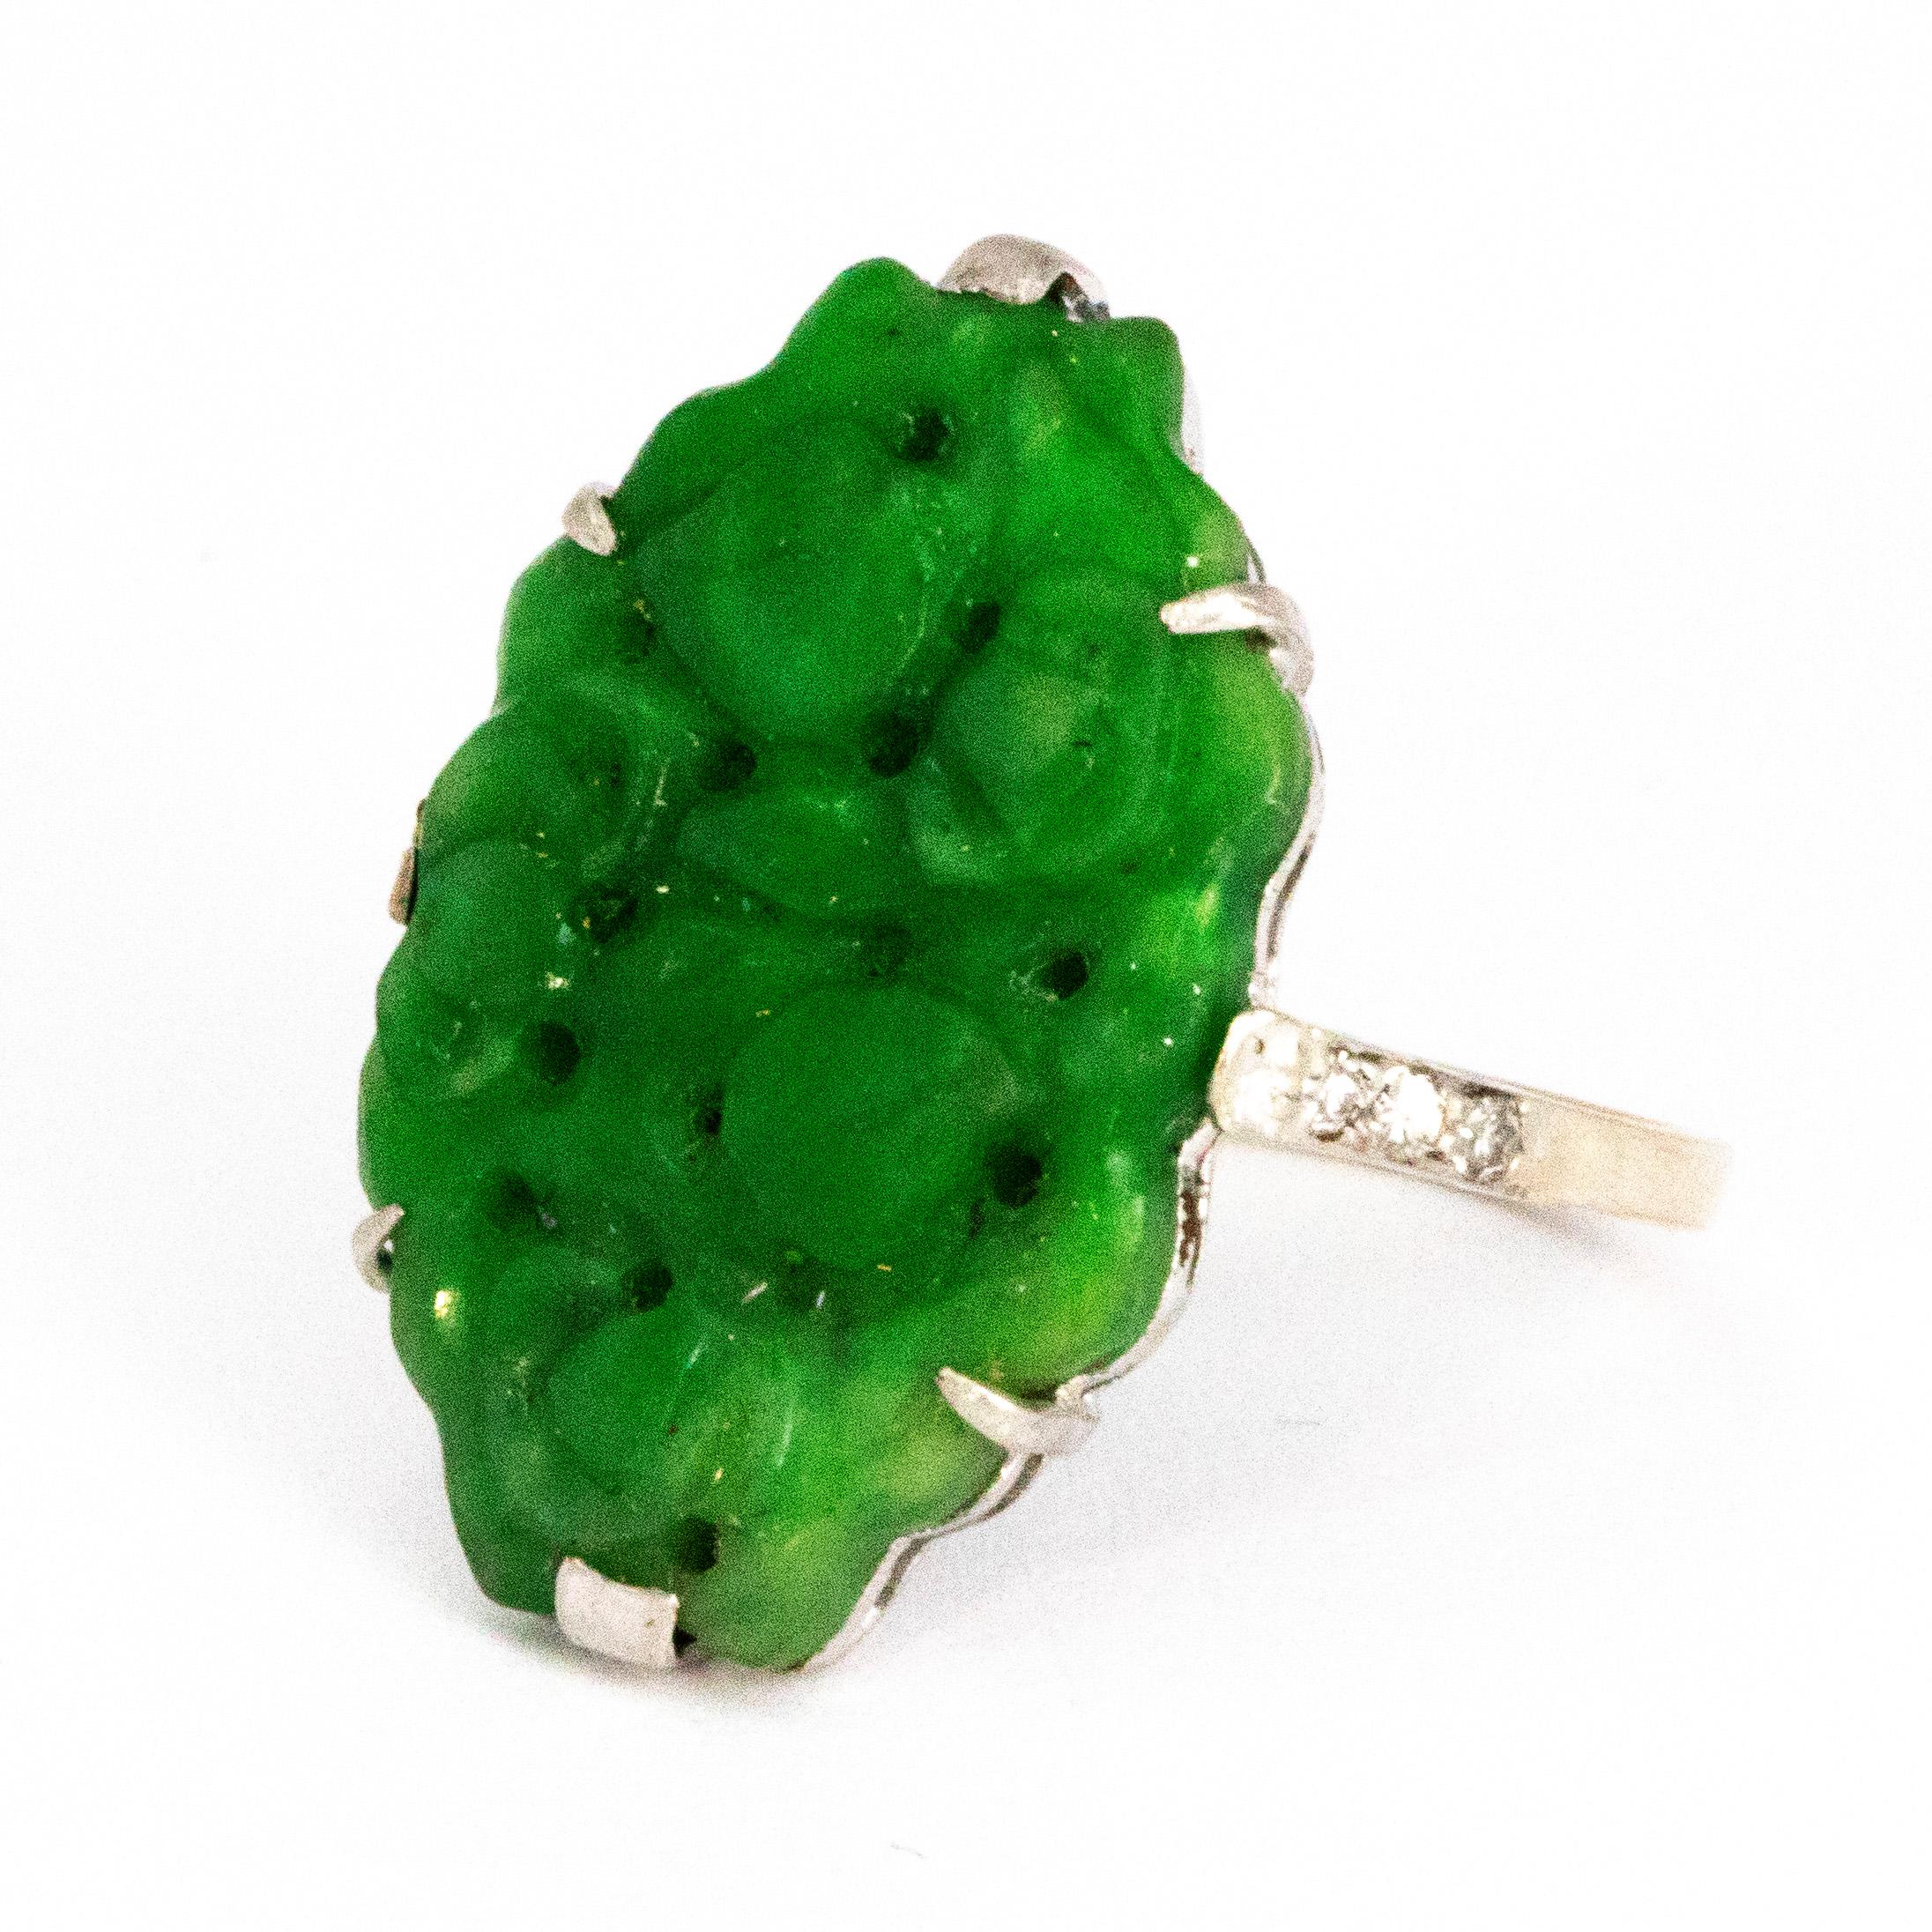 This gorgeous bright green jade stone is simply set in claw settings and the stone itself is exquisitely engraved. The shoulders of the ring hold three small diamonds each. The back of the main stone and the side of the shoulders feature open work